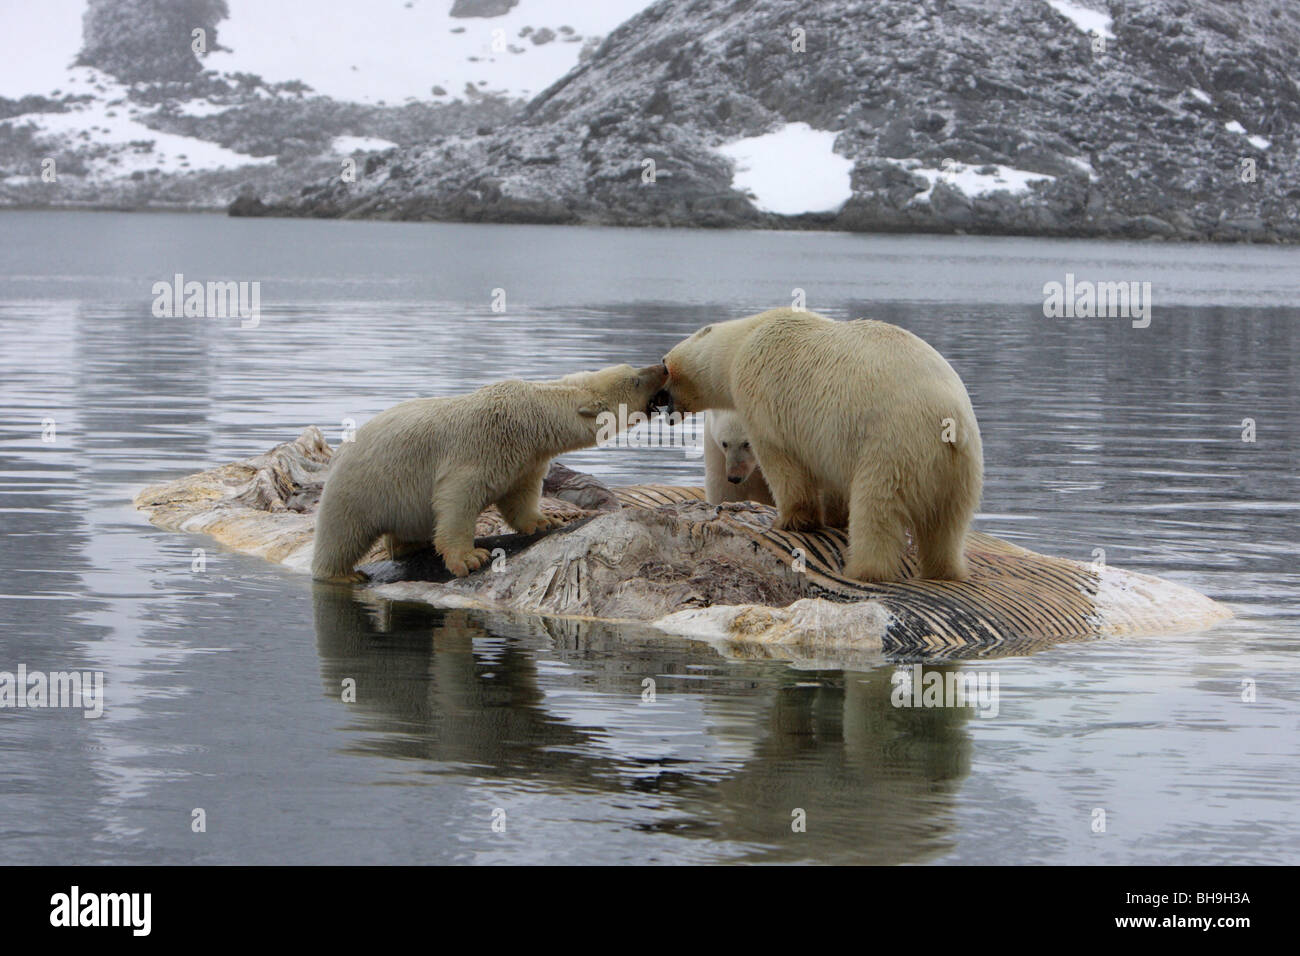 Polar Bear Ursus maritimus two jawing standing on a dead Fin Whale carcass floating in the ocean Stock Photo